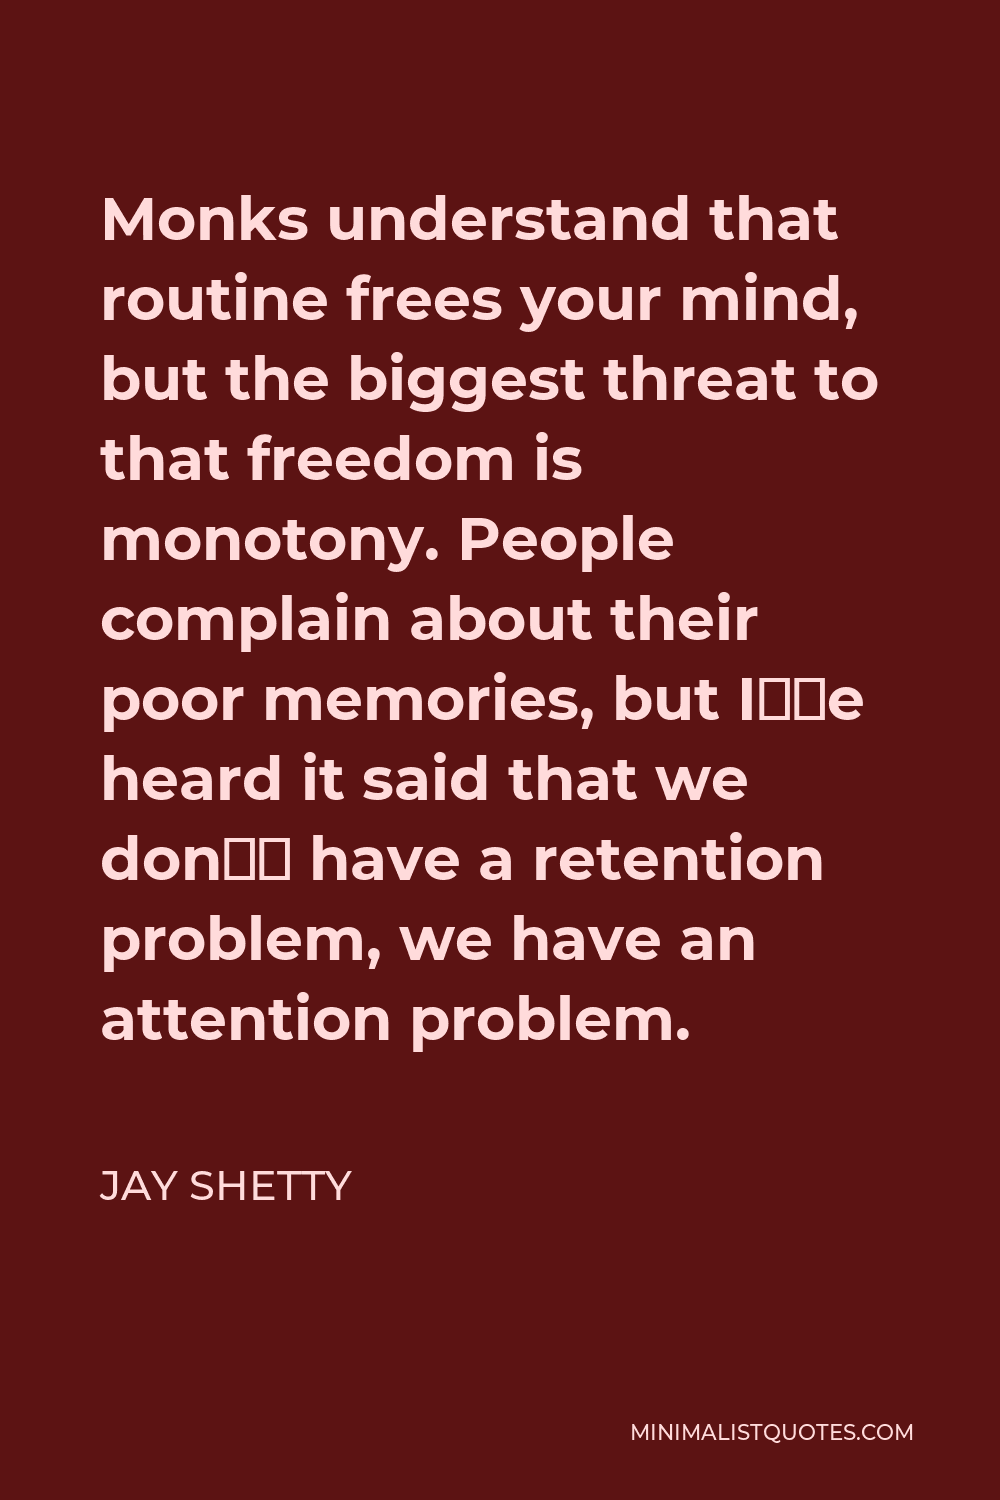 Jay Shetty Quote - Monks understand that routine frees your mind, but the biggest threat to that freedom is monotony. People complain about their poor memories, but I’ve heard it said that we don’t have a retention problem, we have an attention problem.